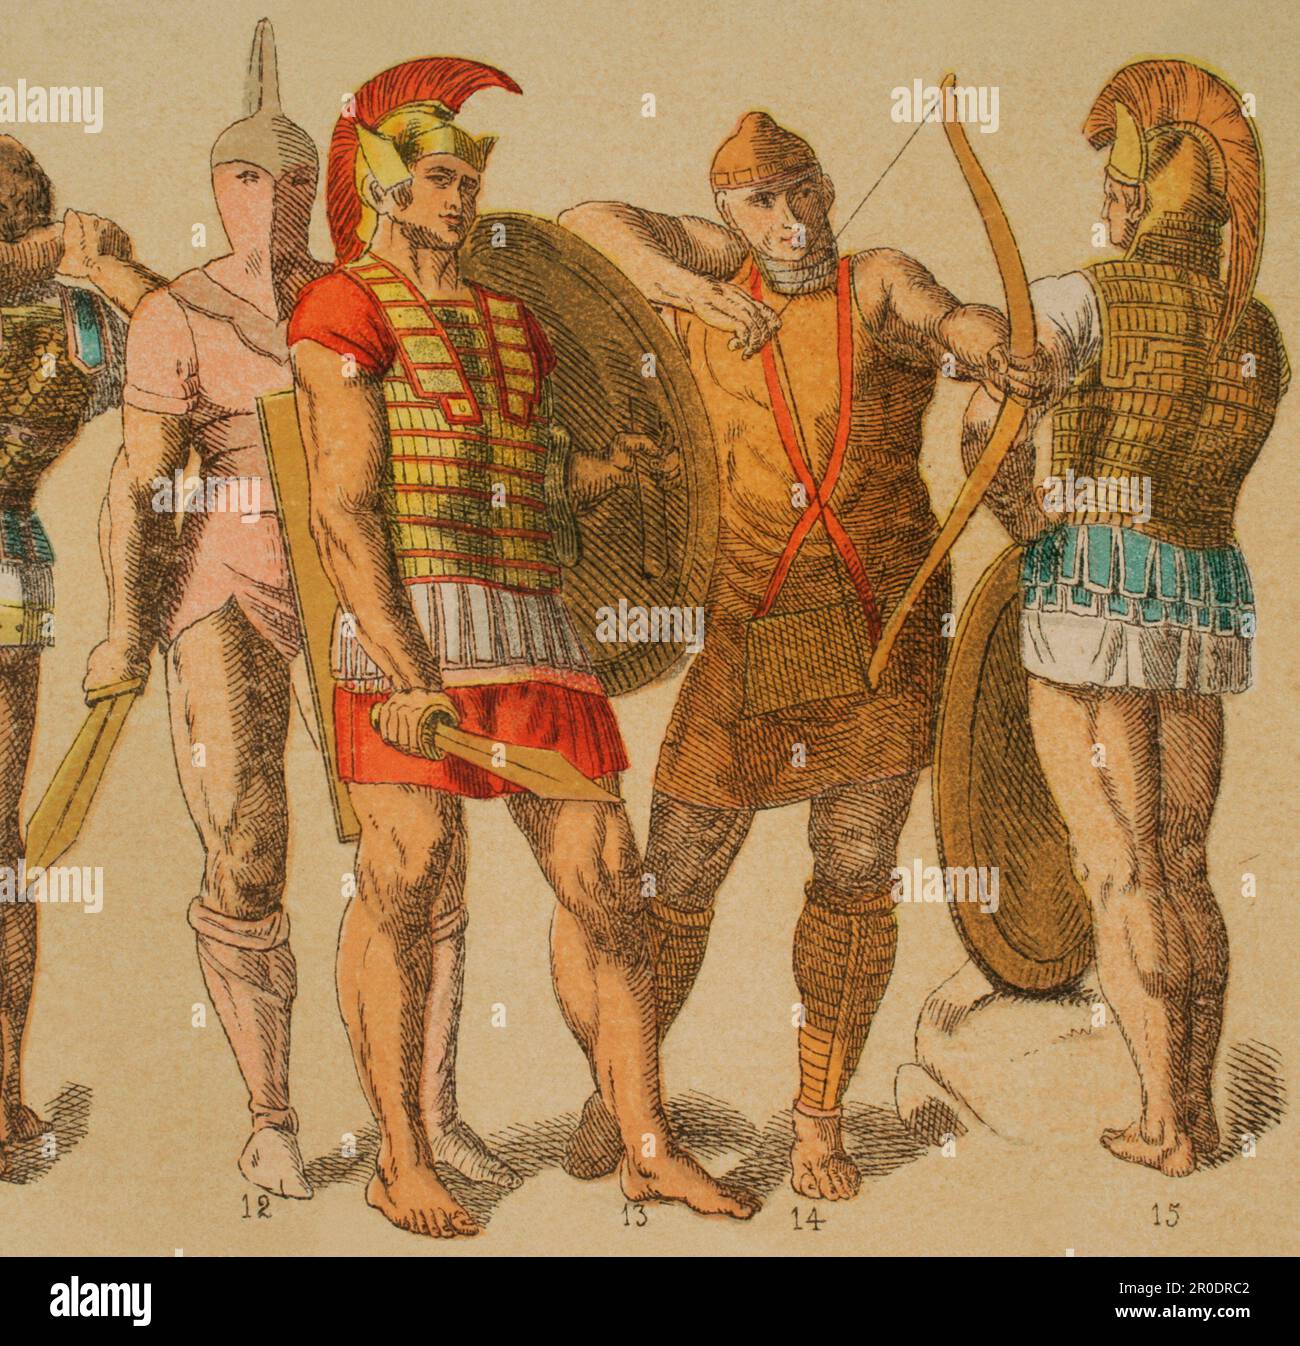 Etruscans. From left to right: 10- chiton, 11,12 and 13- Etruscan armour, 14- leather garments with bronze shield, 15- Etruscan armour. Chromolithography. 'Historia Universal', by César Cantú. Volume II, 1881. Stock Photo